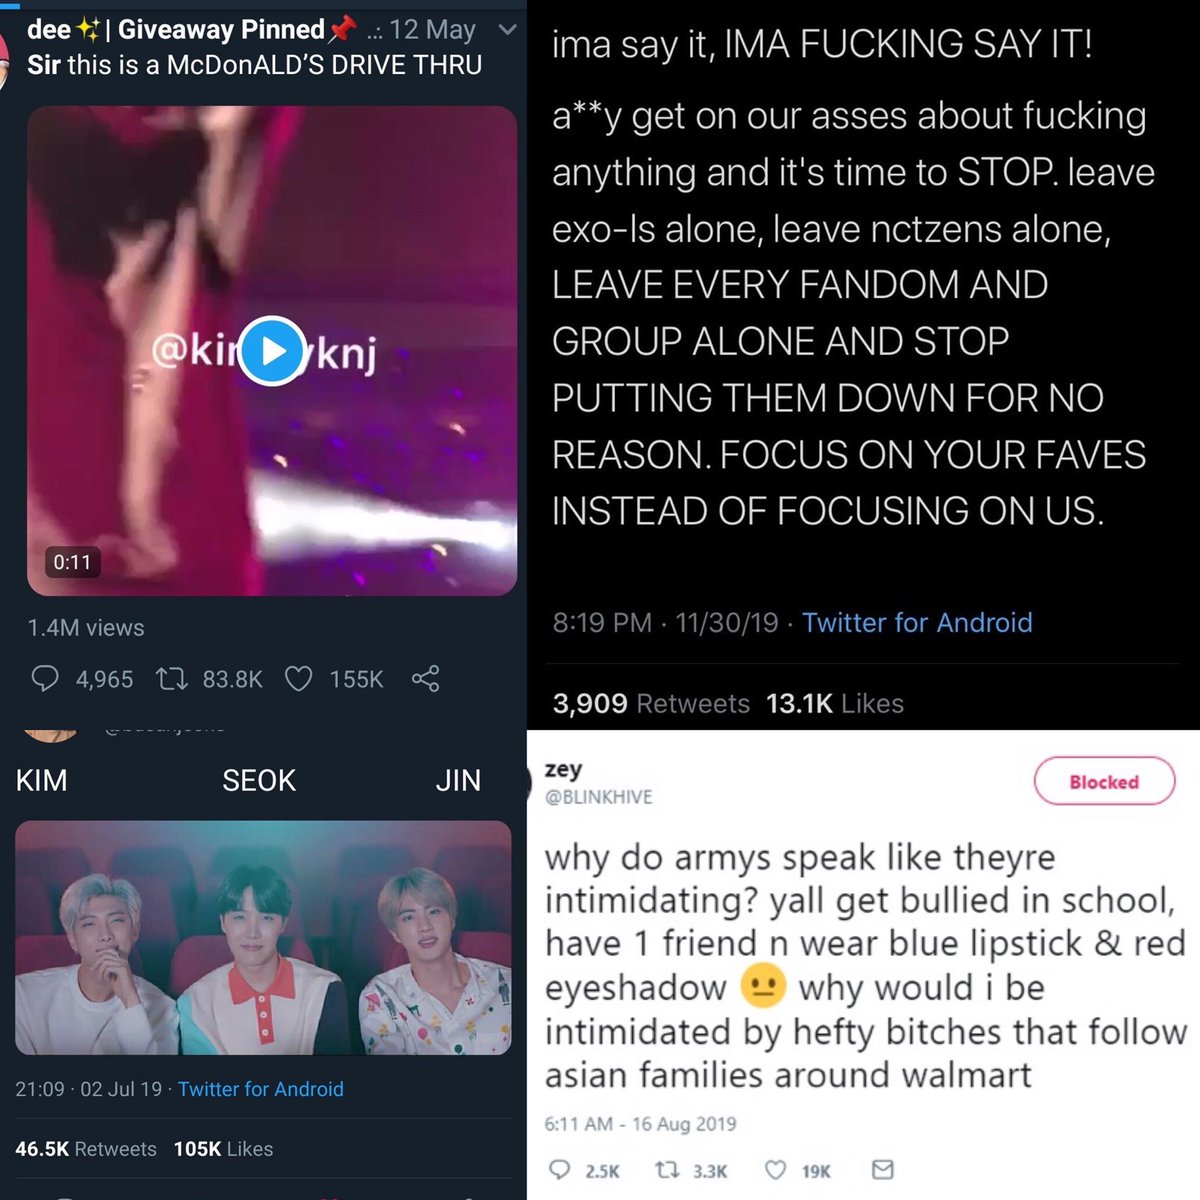 wait cause army viral posts and kpop viral posts are both about bts at the end of the day huh ...  https://twitter.com/bangtanprlnt/status/1246694457631584256?s=21